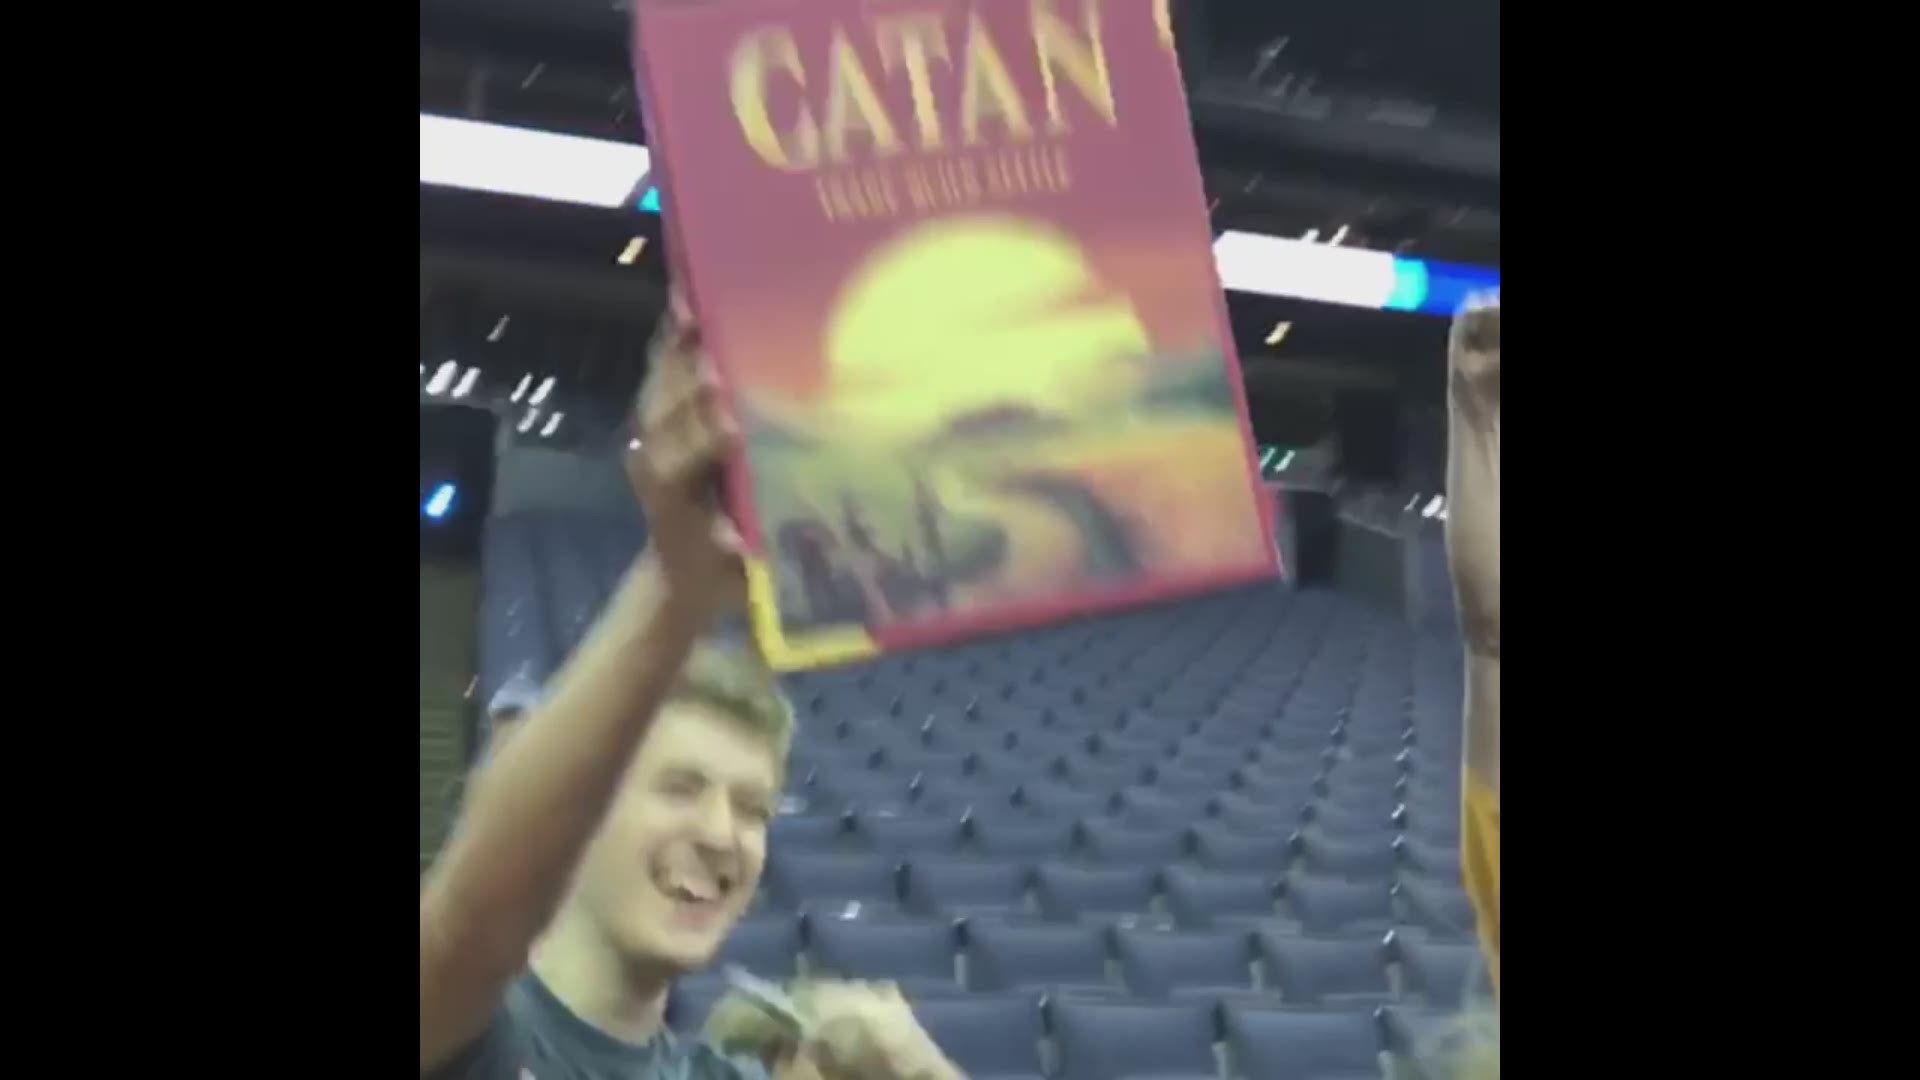 Grant Williams is a big Settlers of Catan fan, so one Tennessee fan figured he'd bring a copy for him to sign.